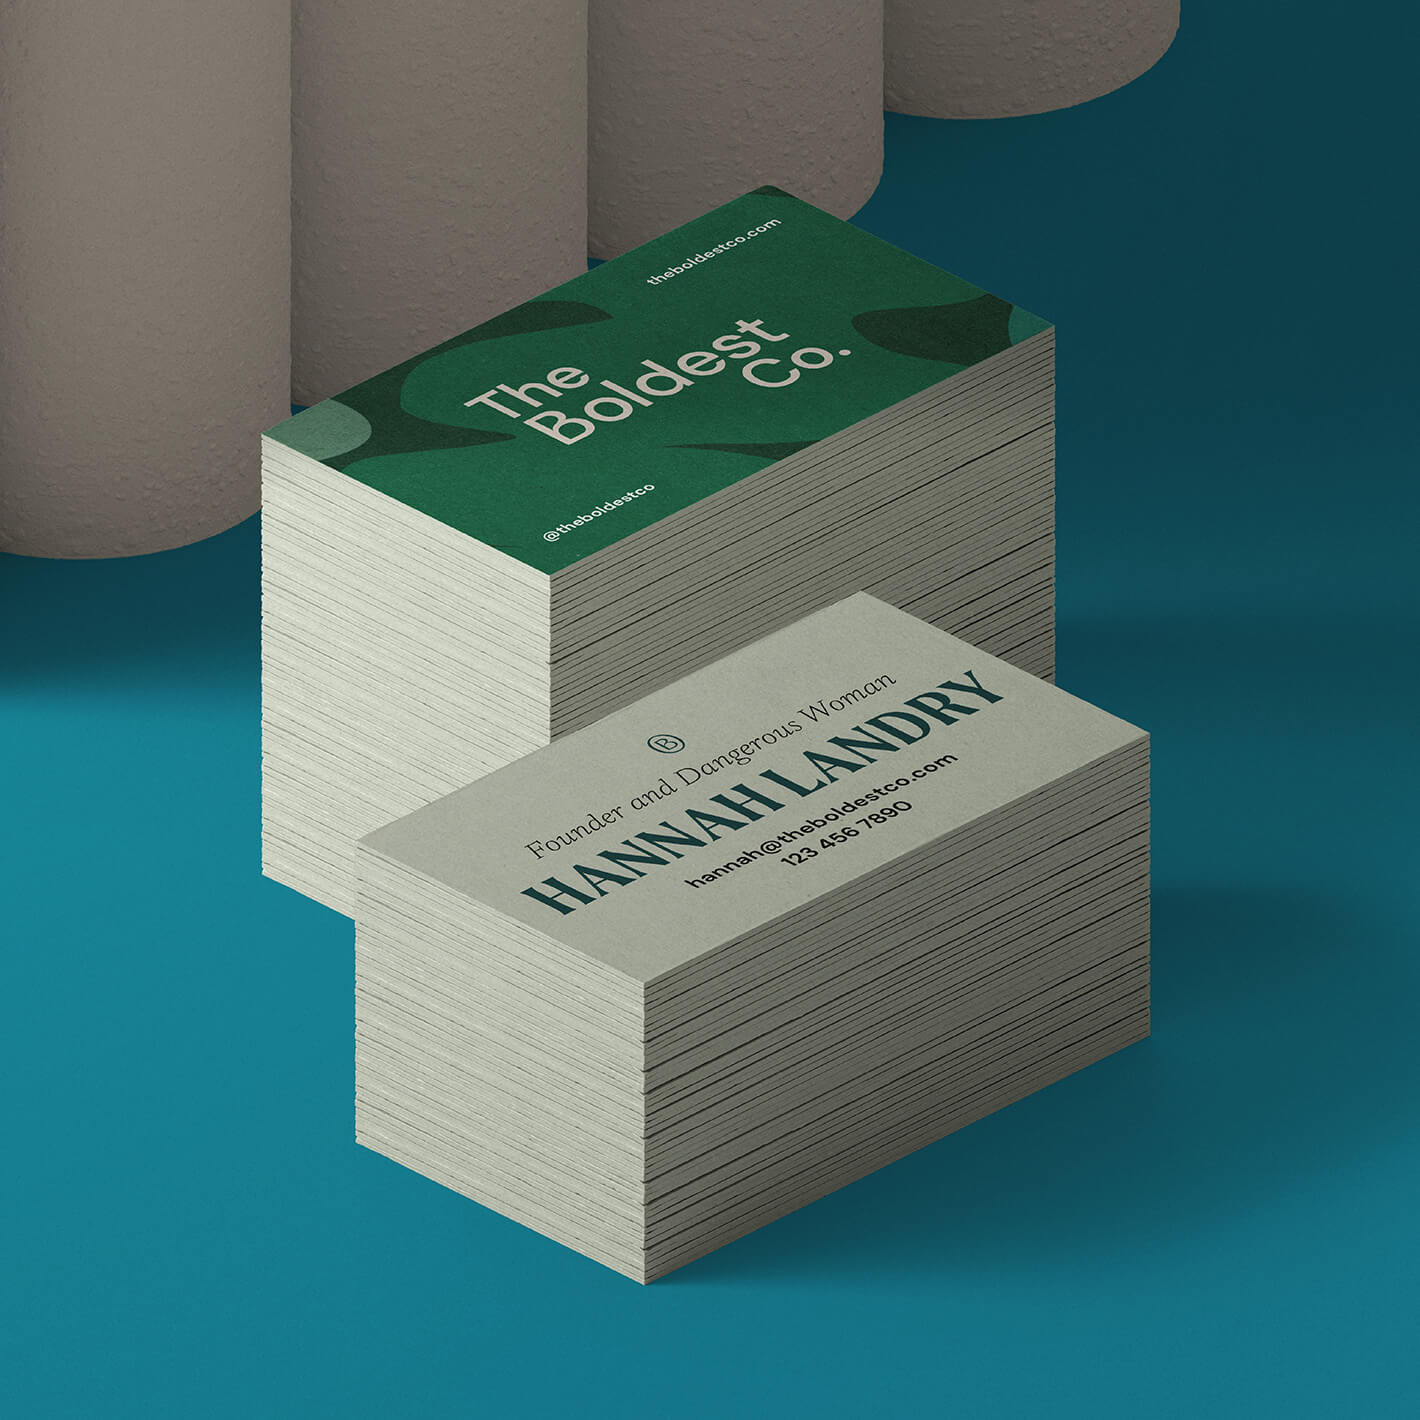 The Boldest Co business cards sit in a deep green background. The front of the card shows the brand logo on a green blob-textured background while the back features founder Hannah’s details and simple typesetting.